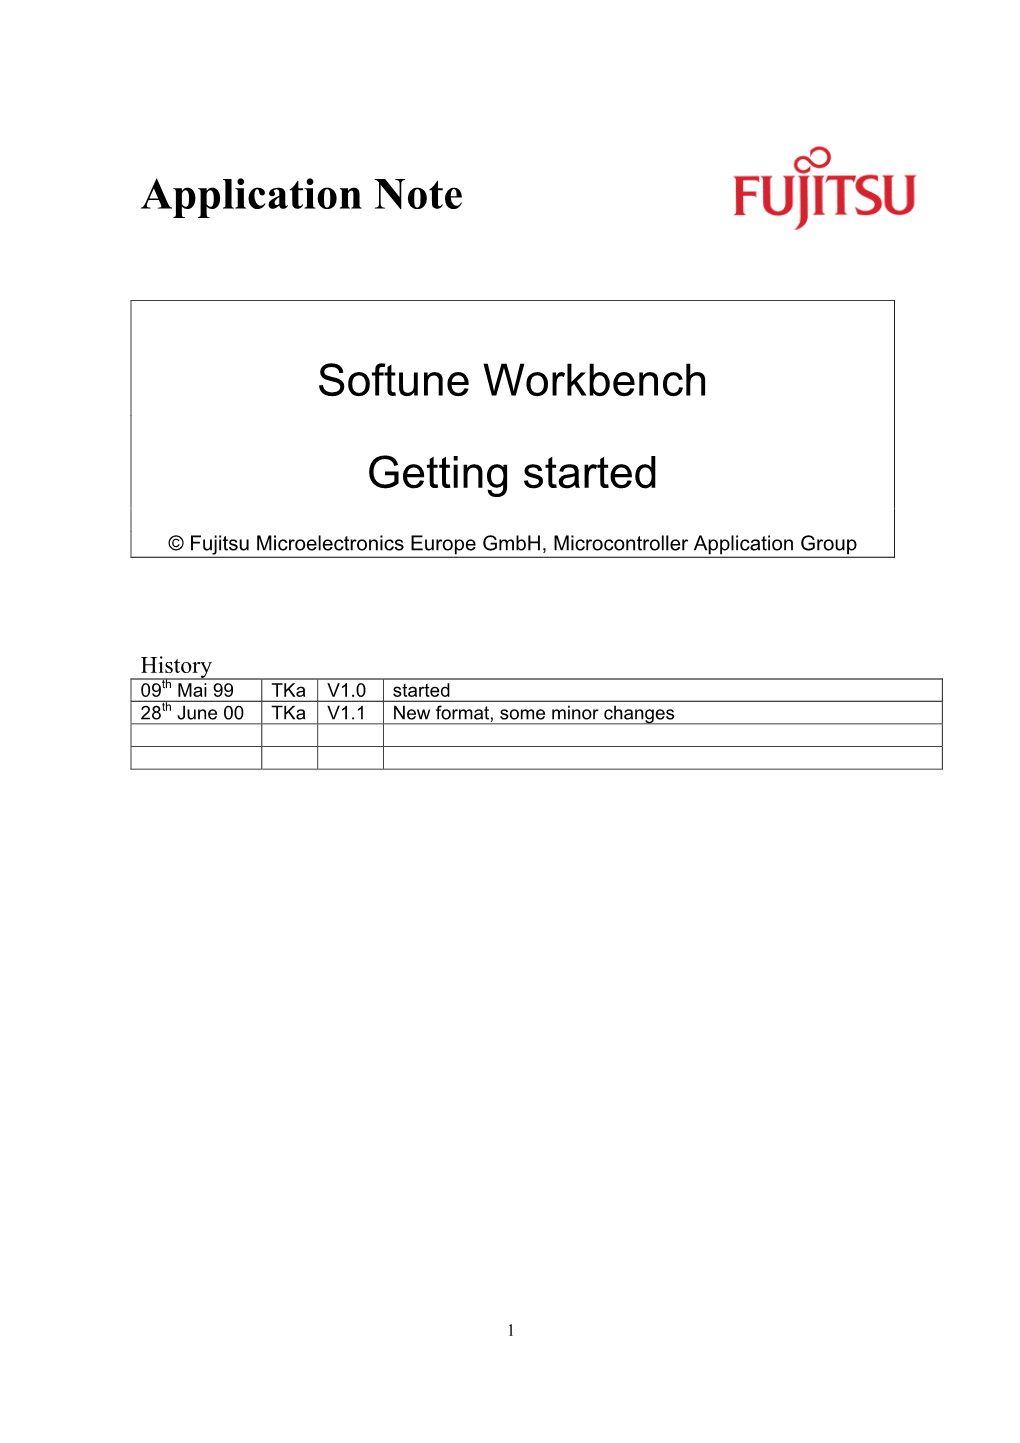 Application Note Softune Workbench Getting Started